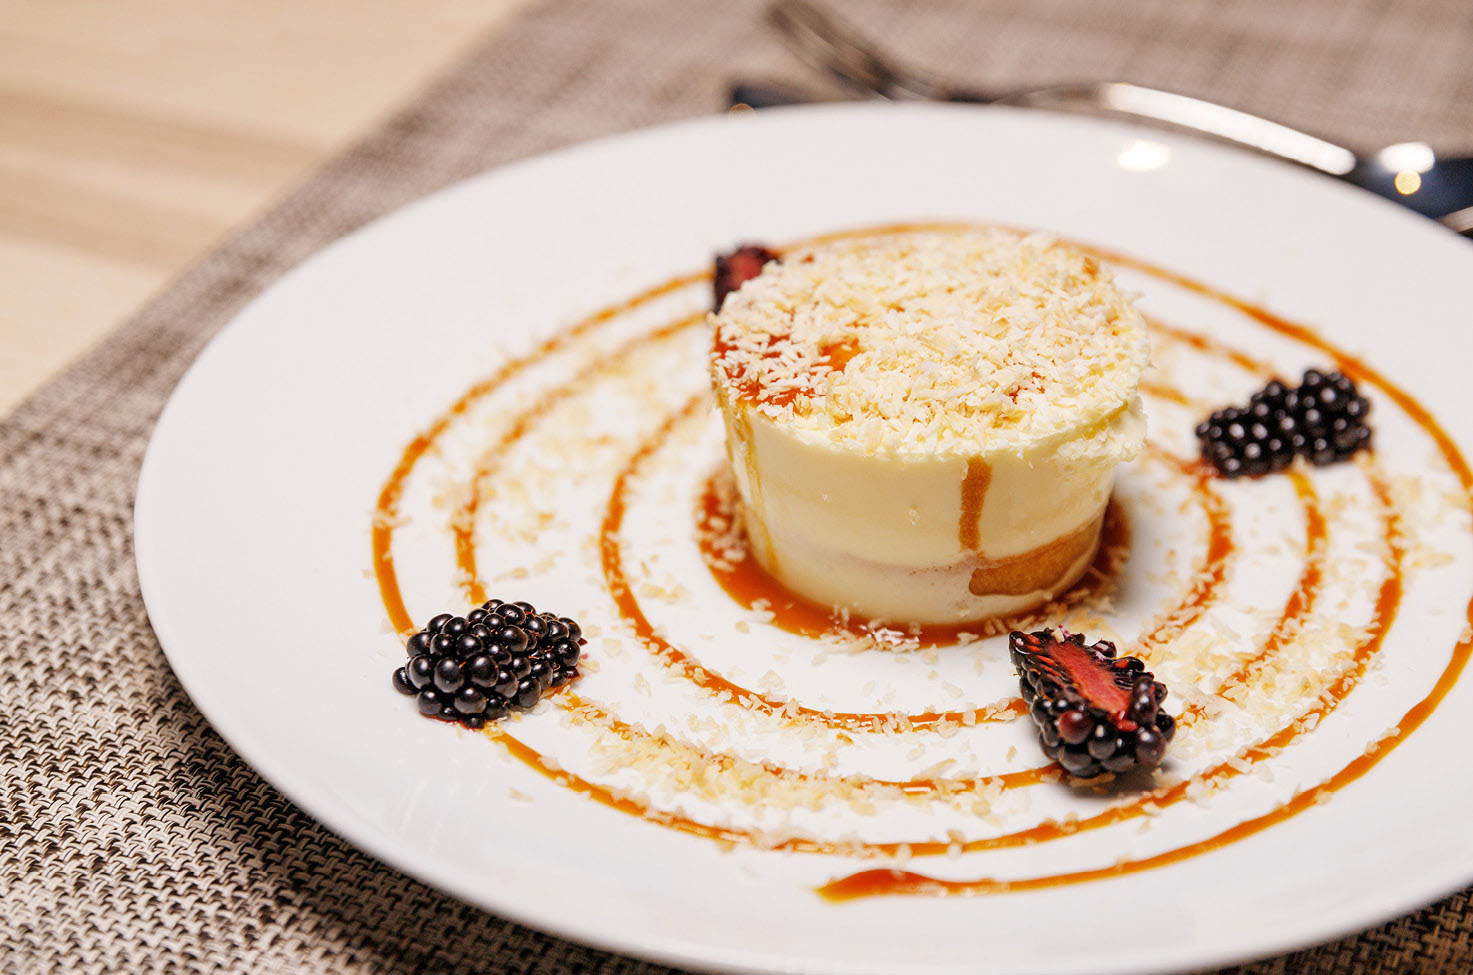 A delicious summer dessert sits on a white plate, with blackberries and a fruit coulis used to decorate the dish